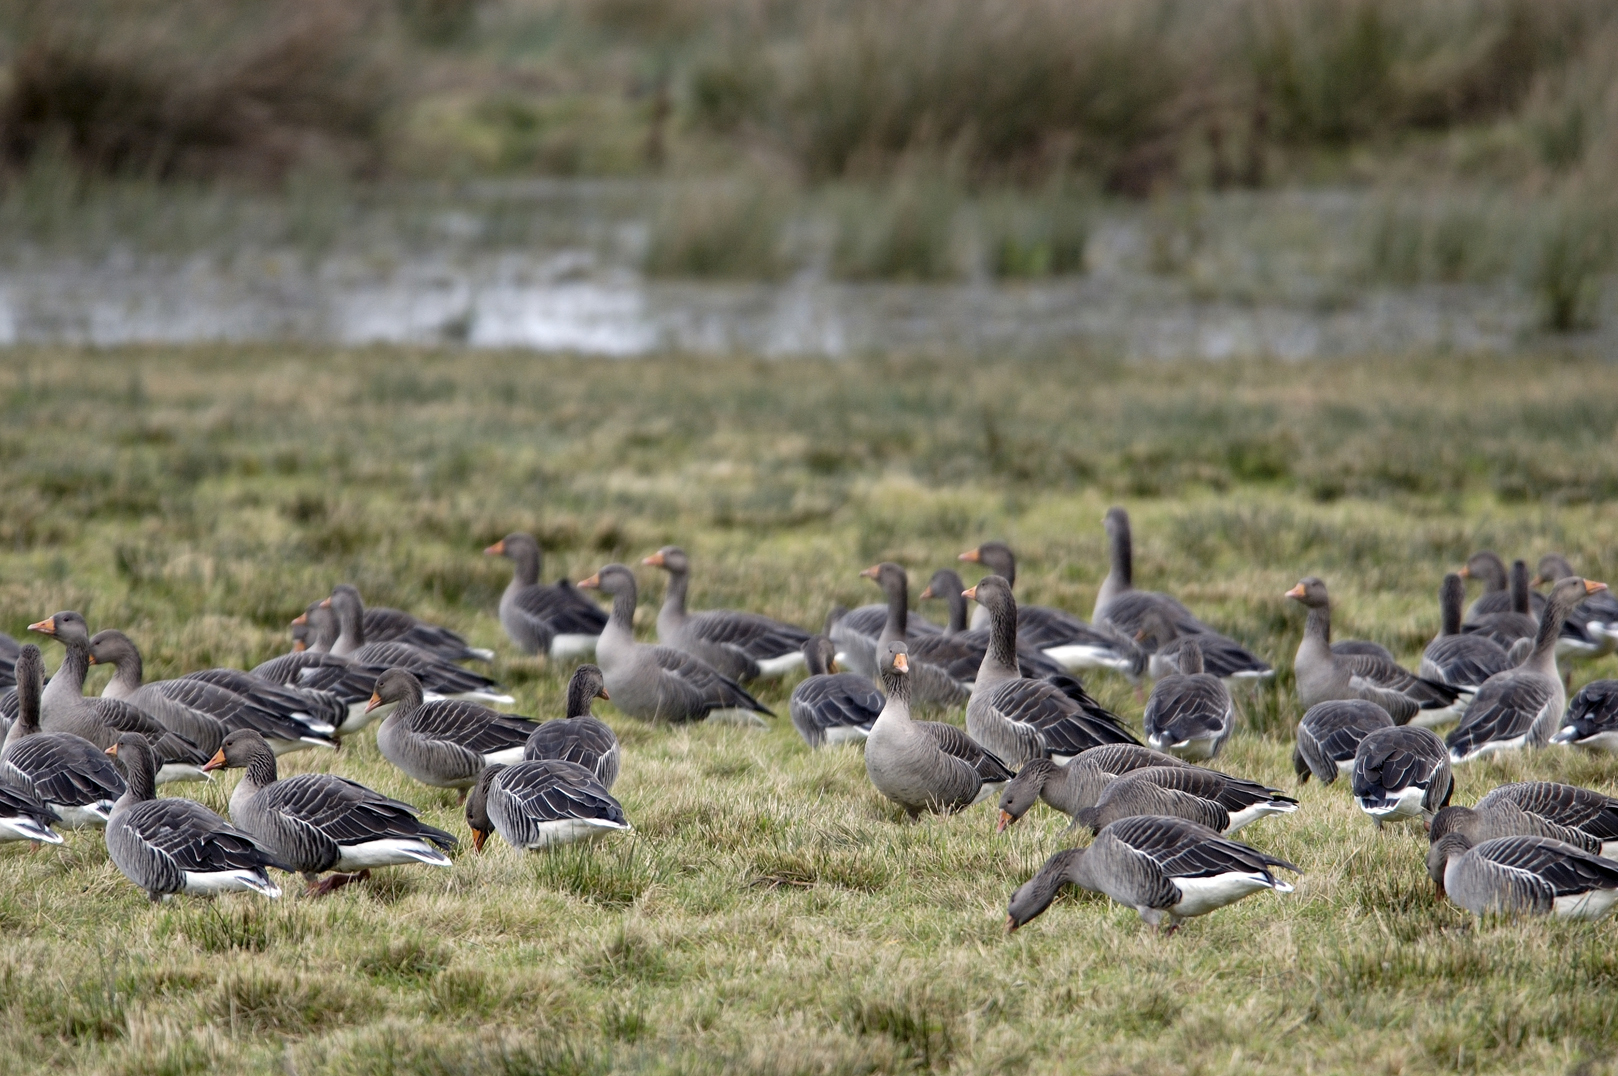 A Holryood committee has called for an urgent rethink of how the numbers of wild geese are controlled.